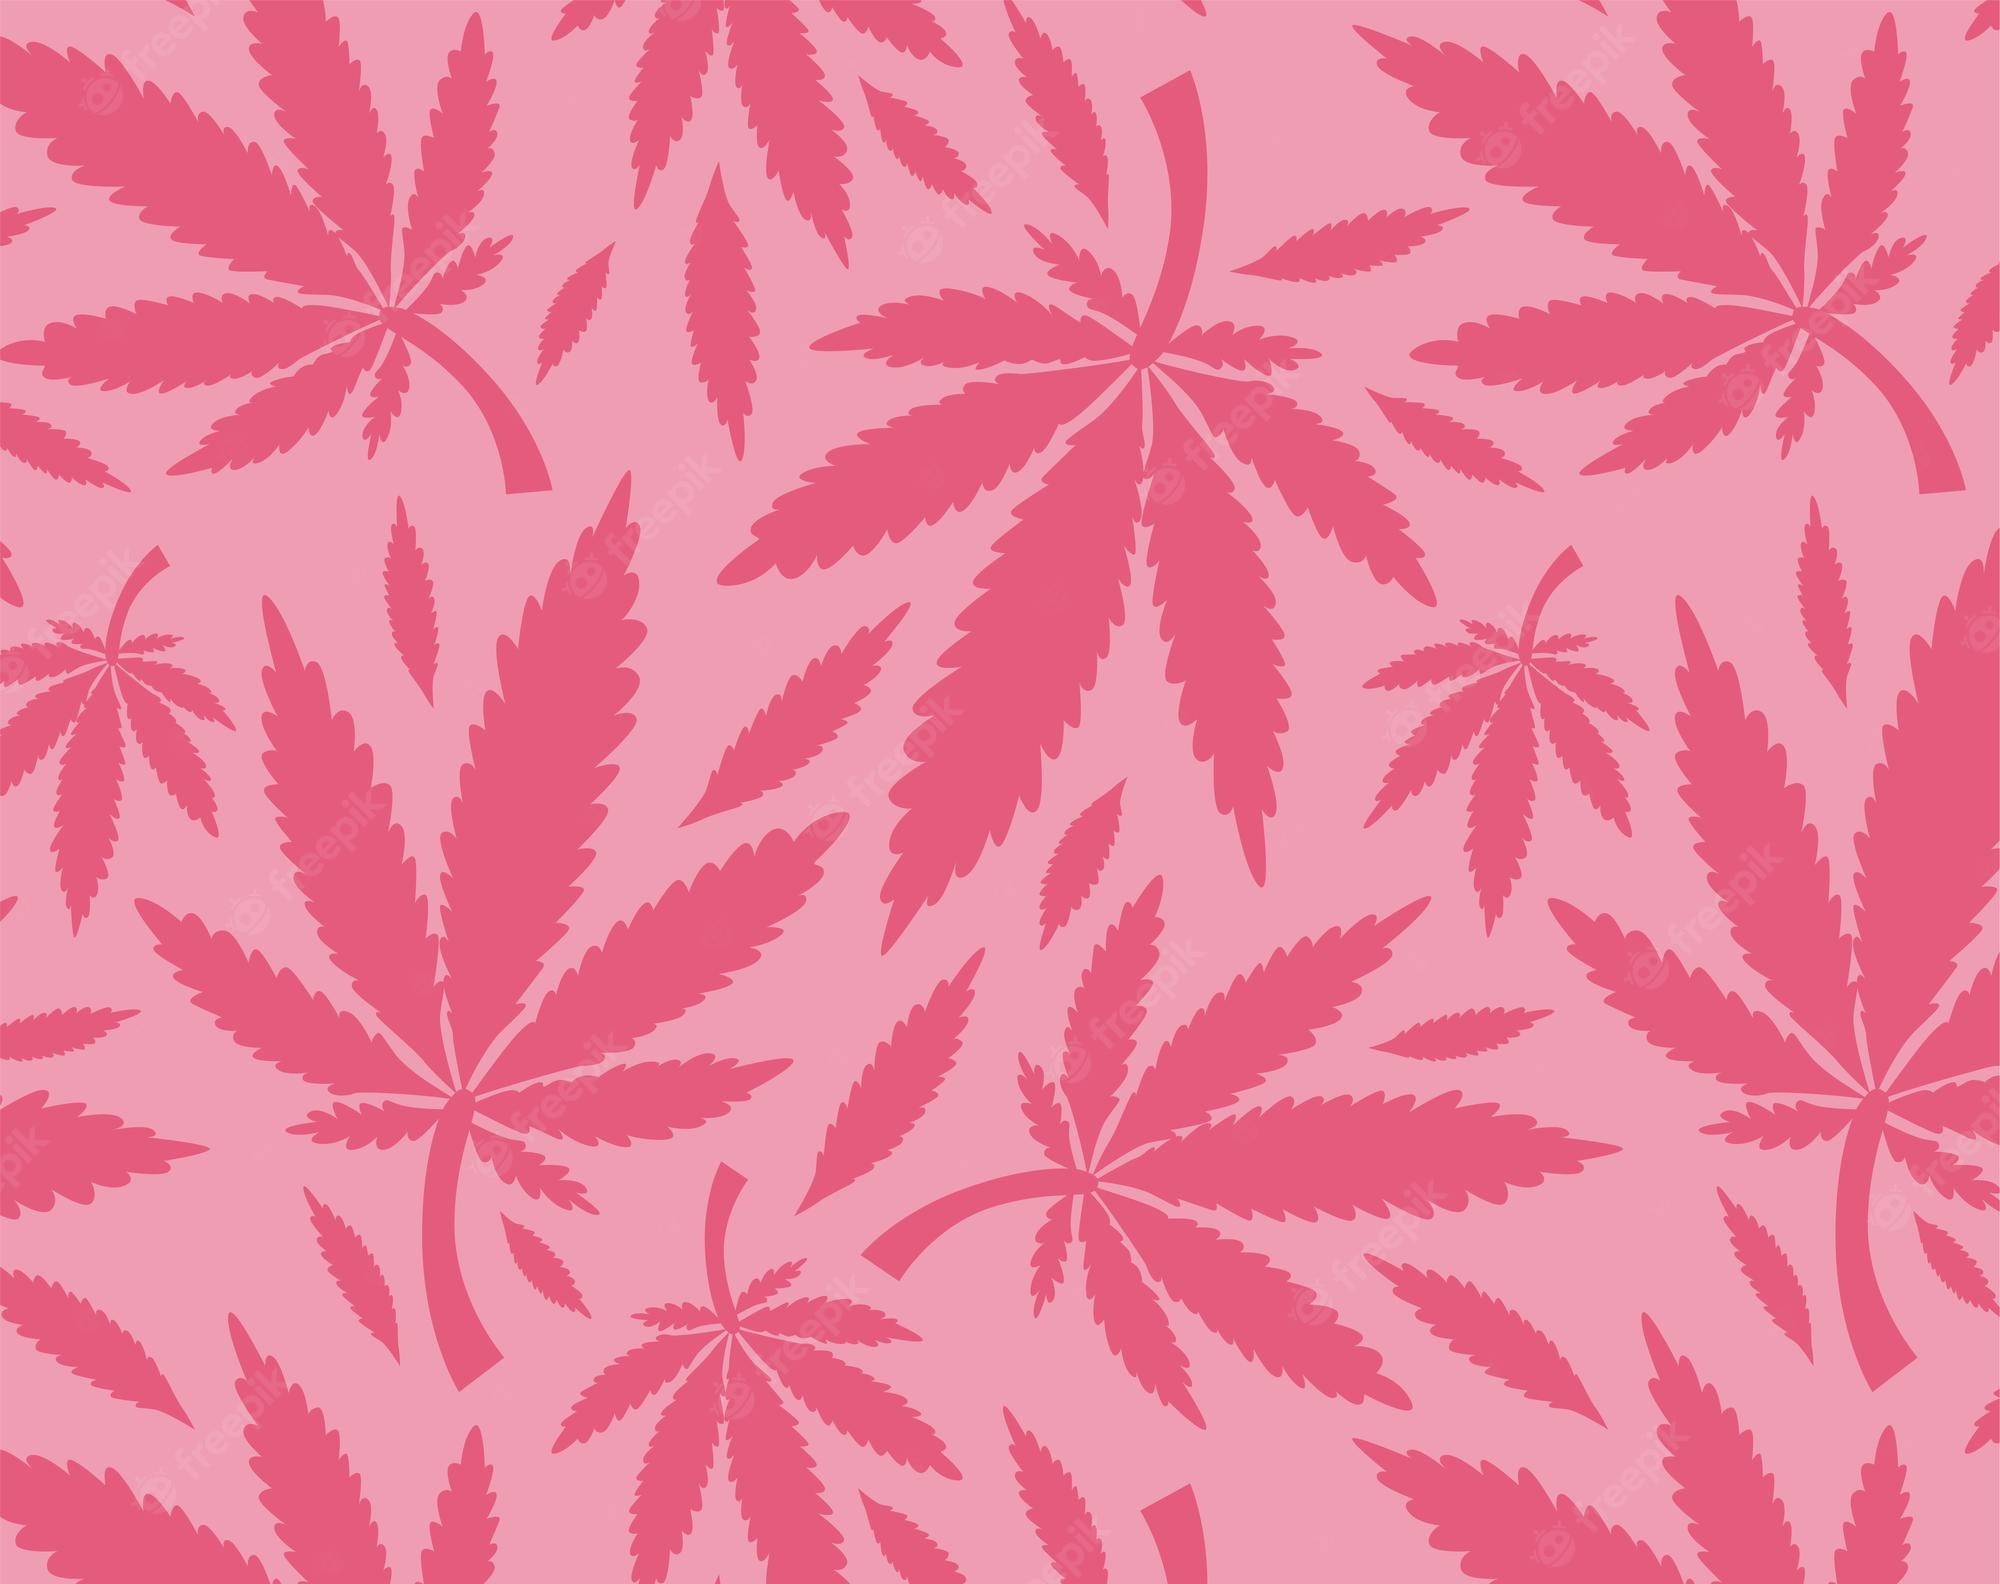 Pink Weed Wallpapers